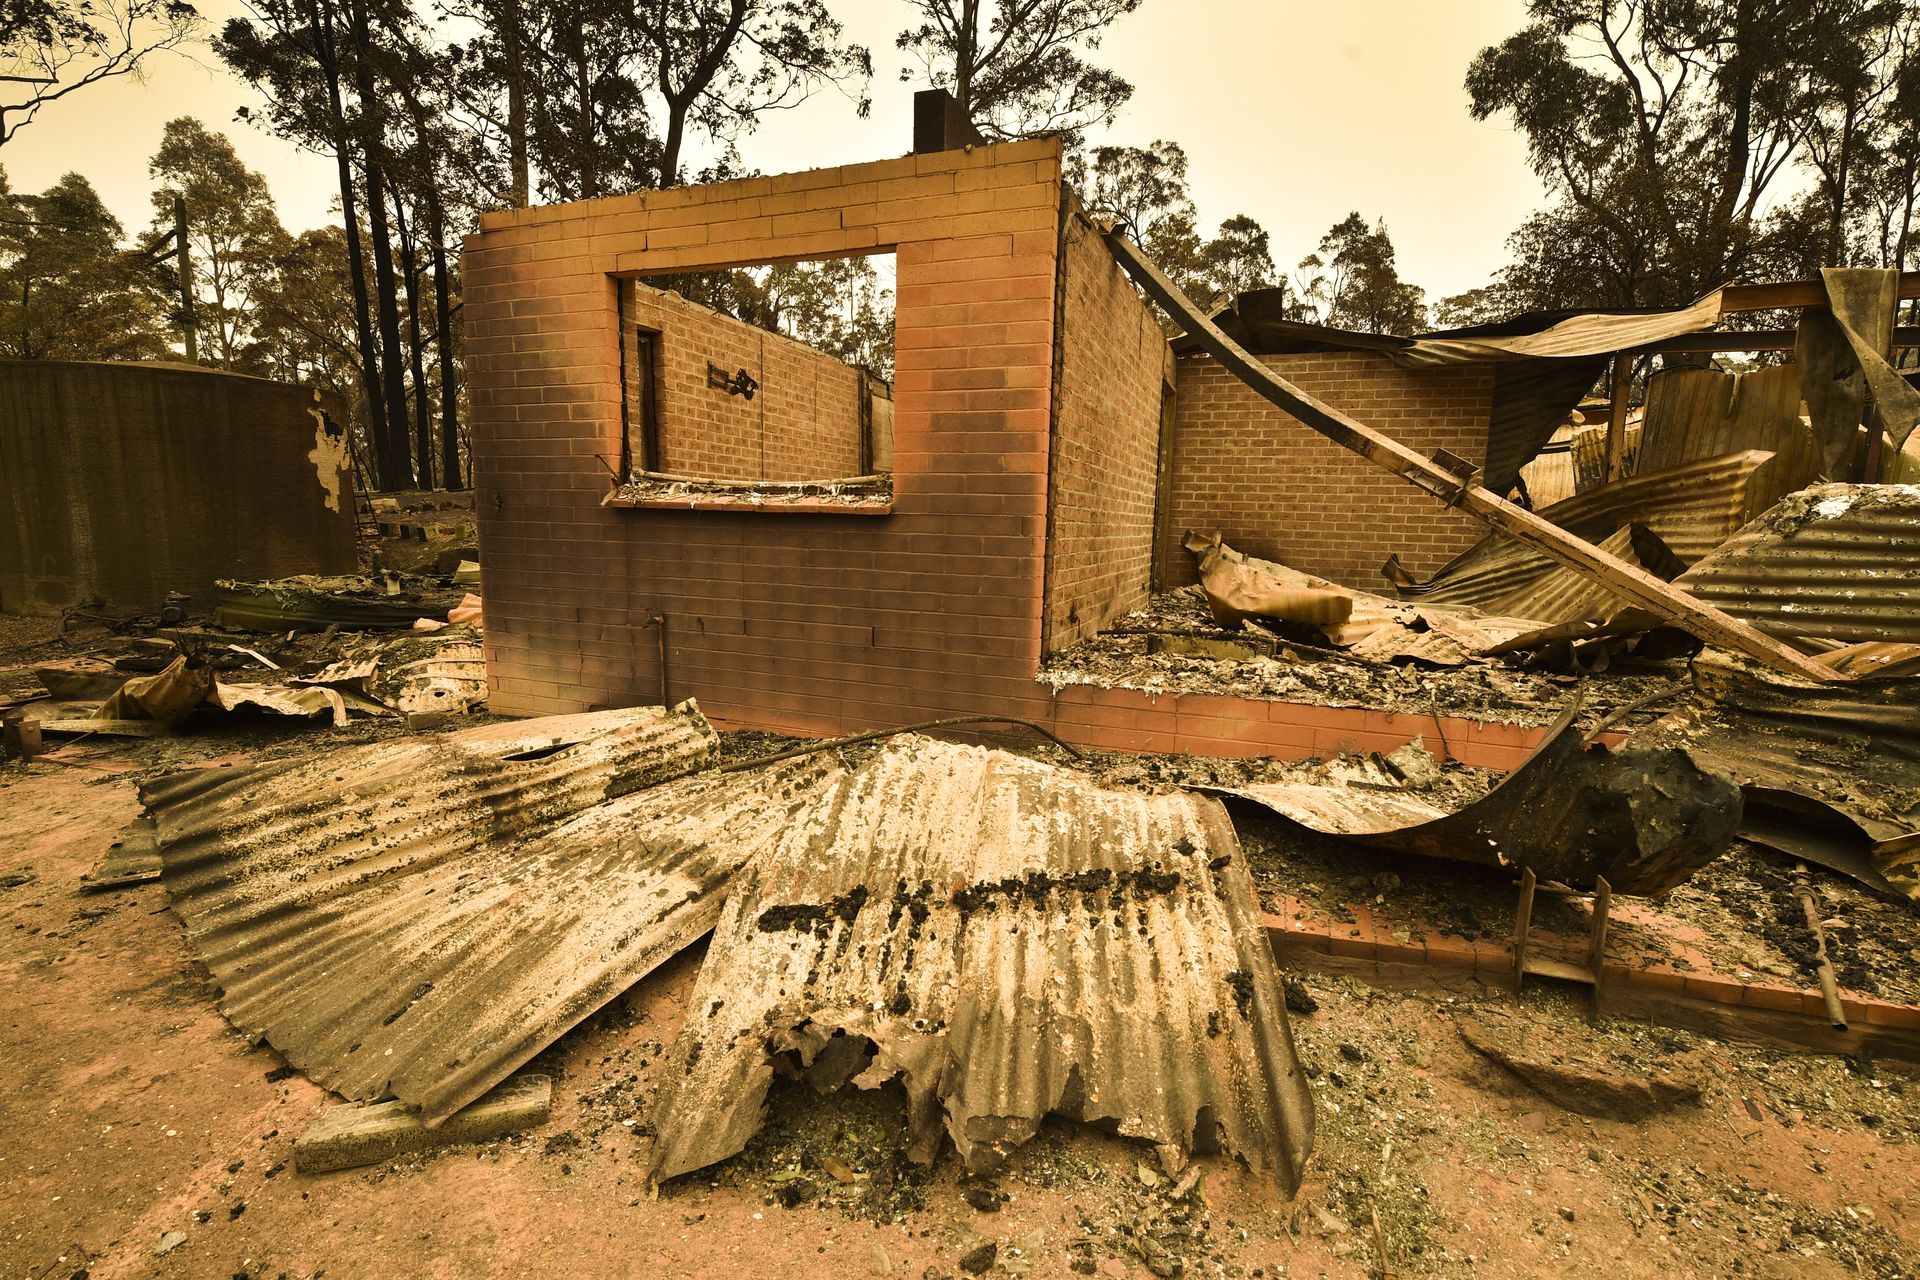 A house leveled by the fires in Australia